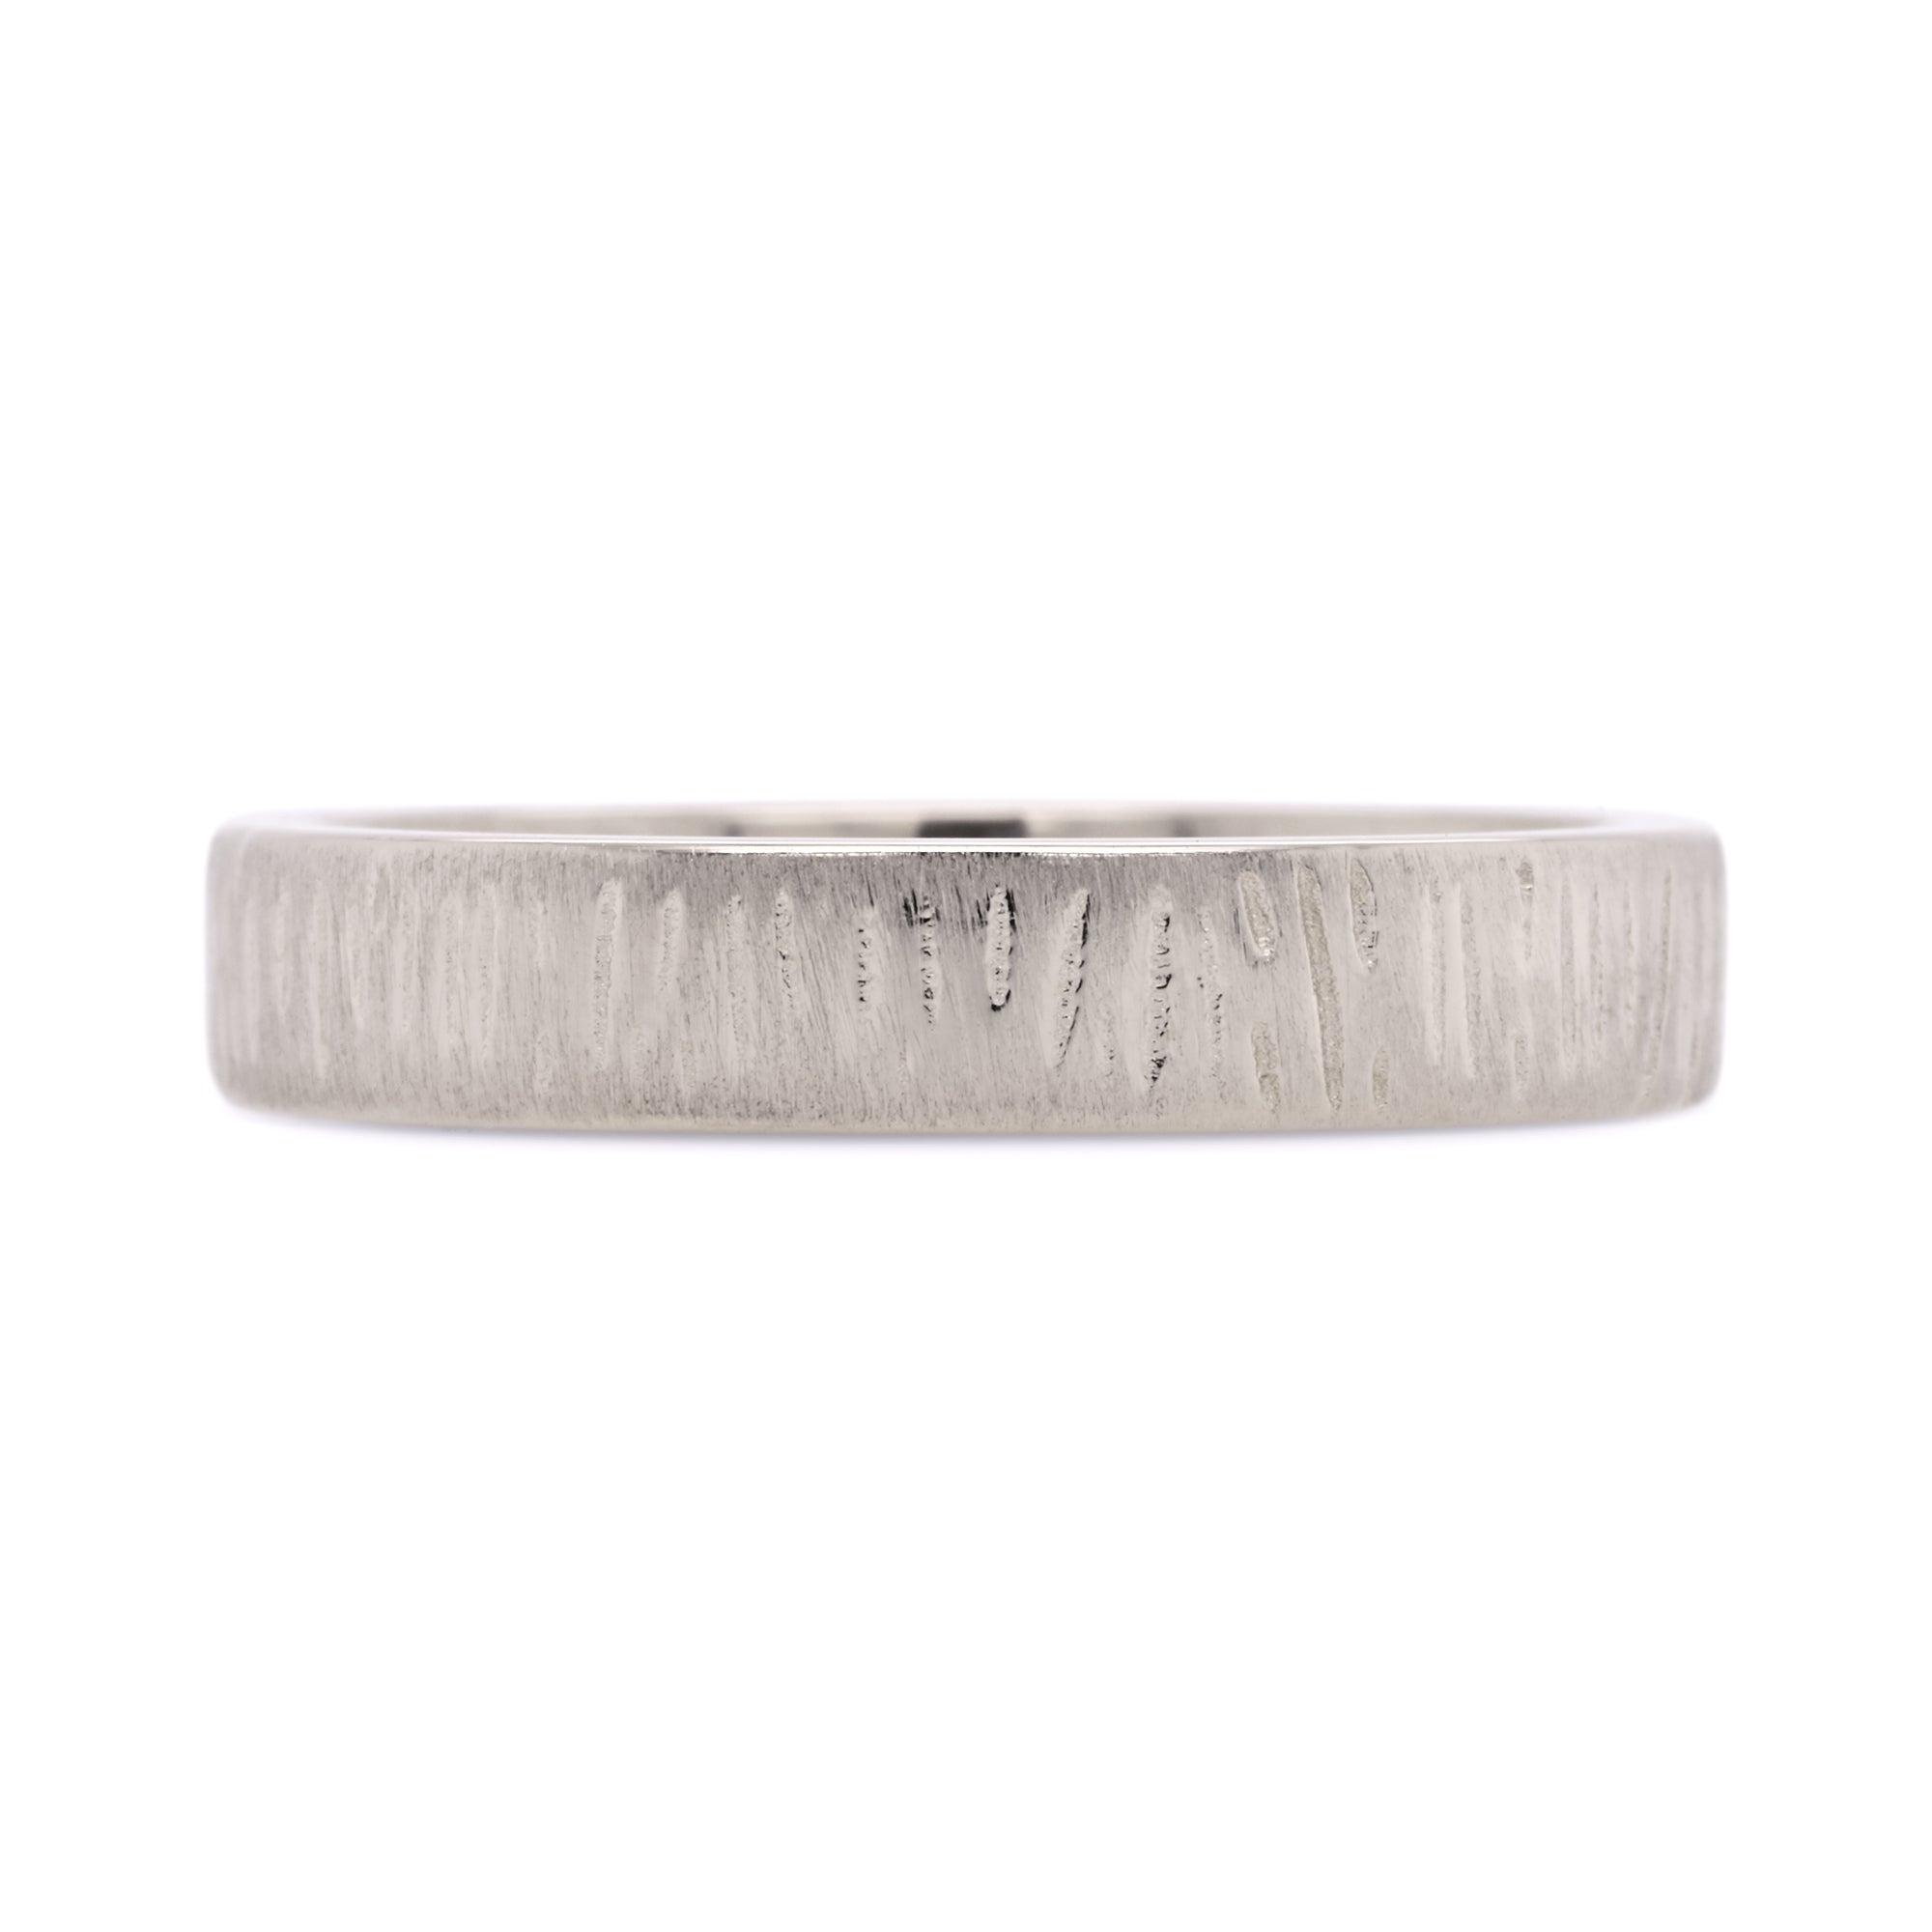 4mm white gold wedding band with carved woodgrain texture